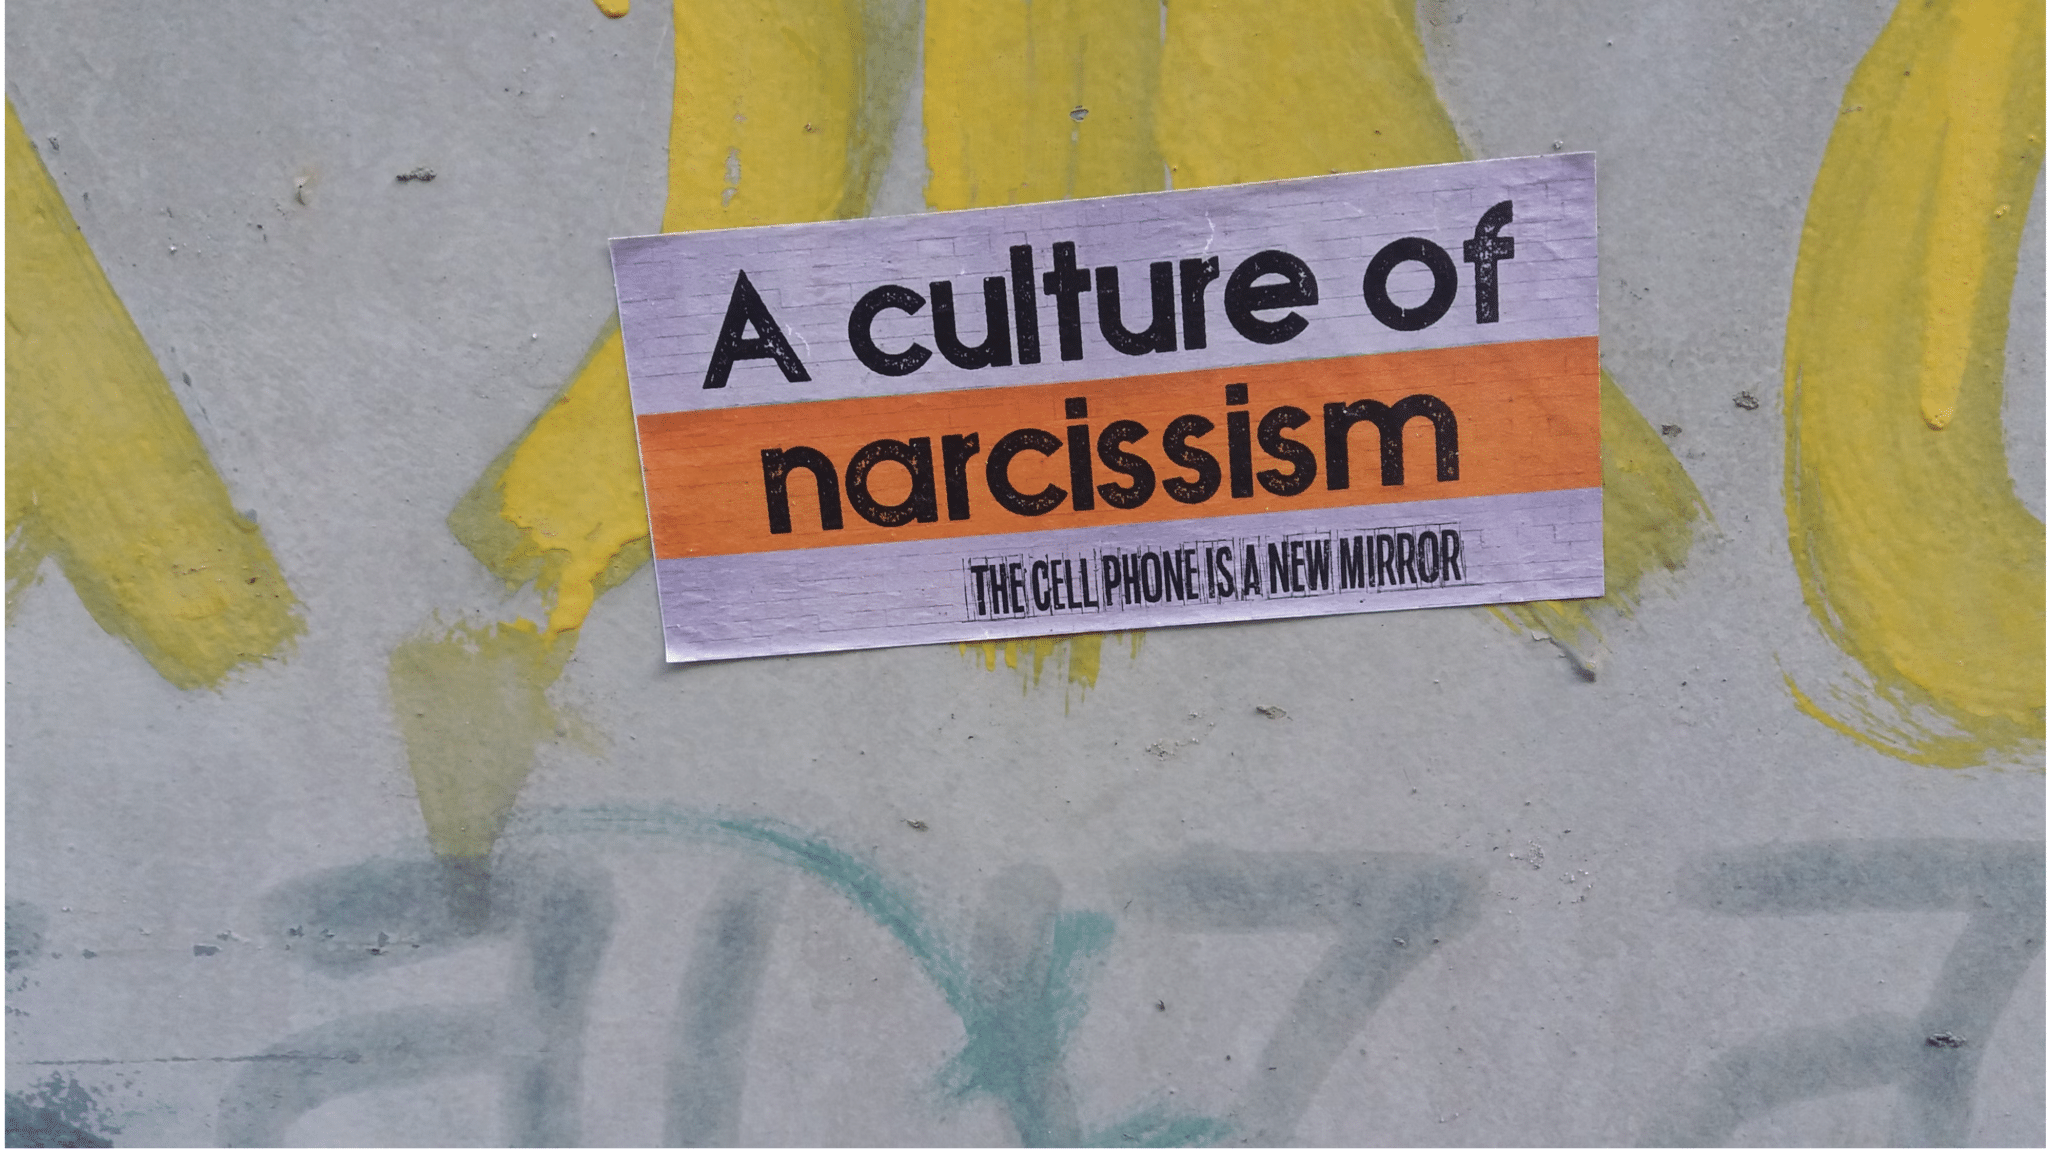 What Does The Bible Say About Narcissism?